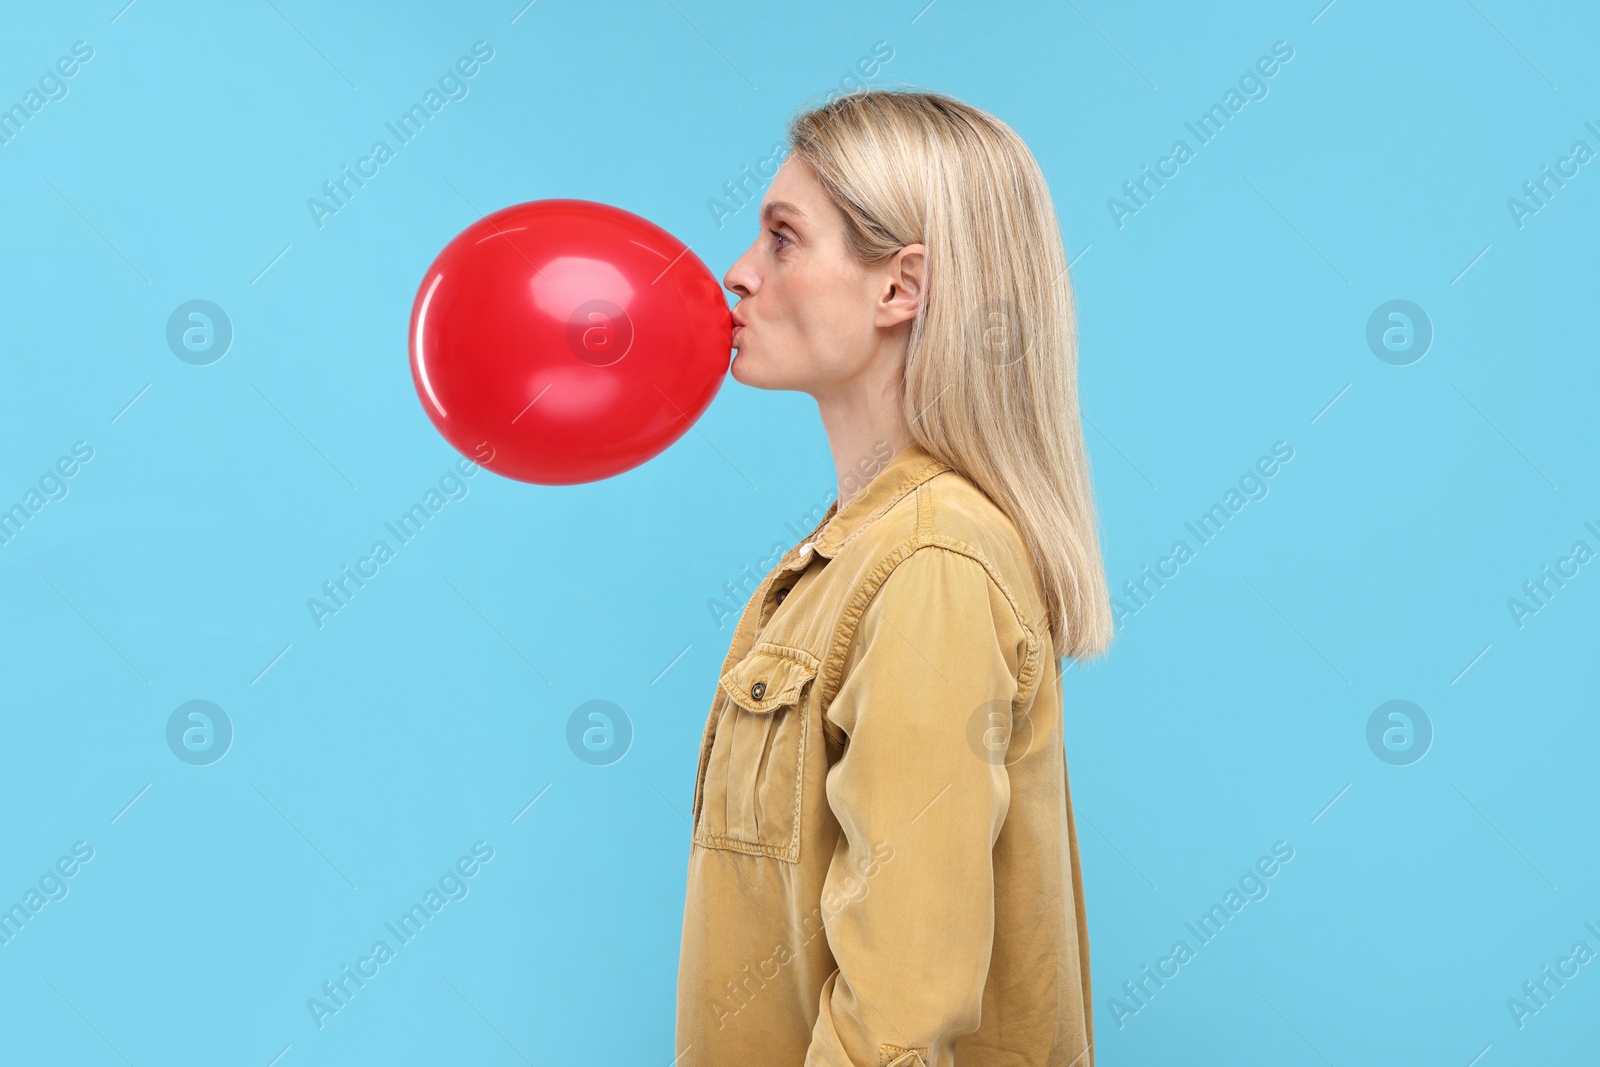 Photo of Woman blowing up balloon on light blue background